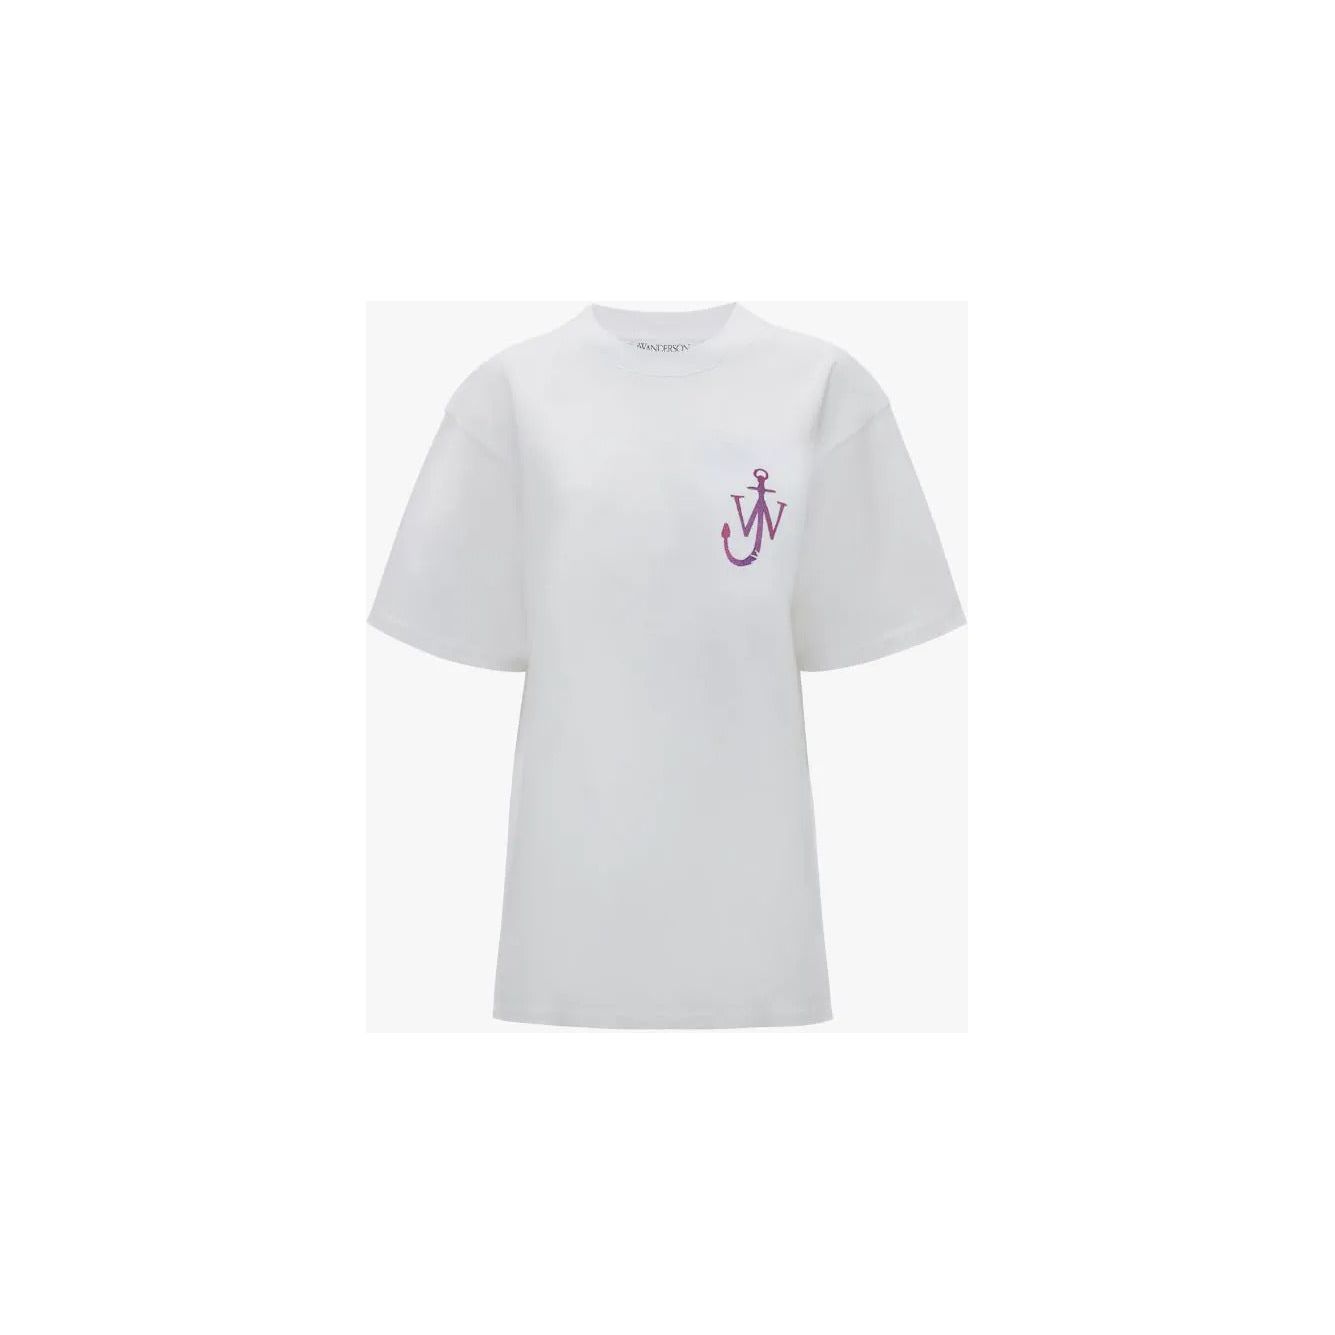 JW ANDERSON "NATURALLY SWEET" CLASSIC T-SHIRT - Yooto